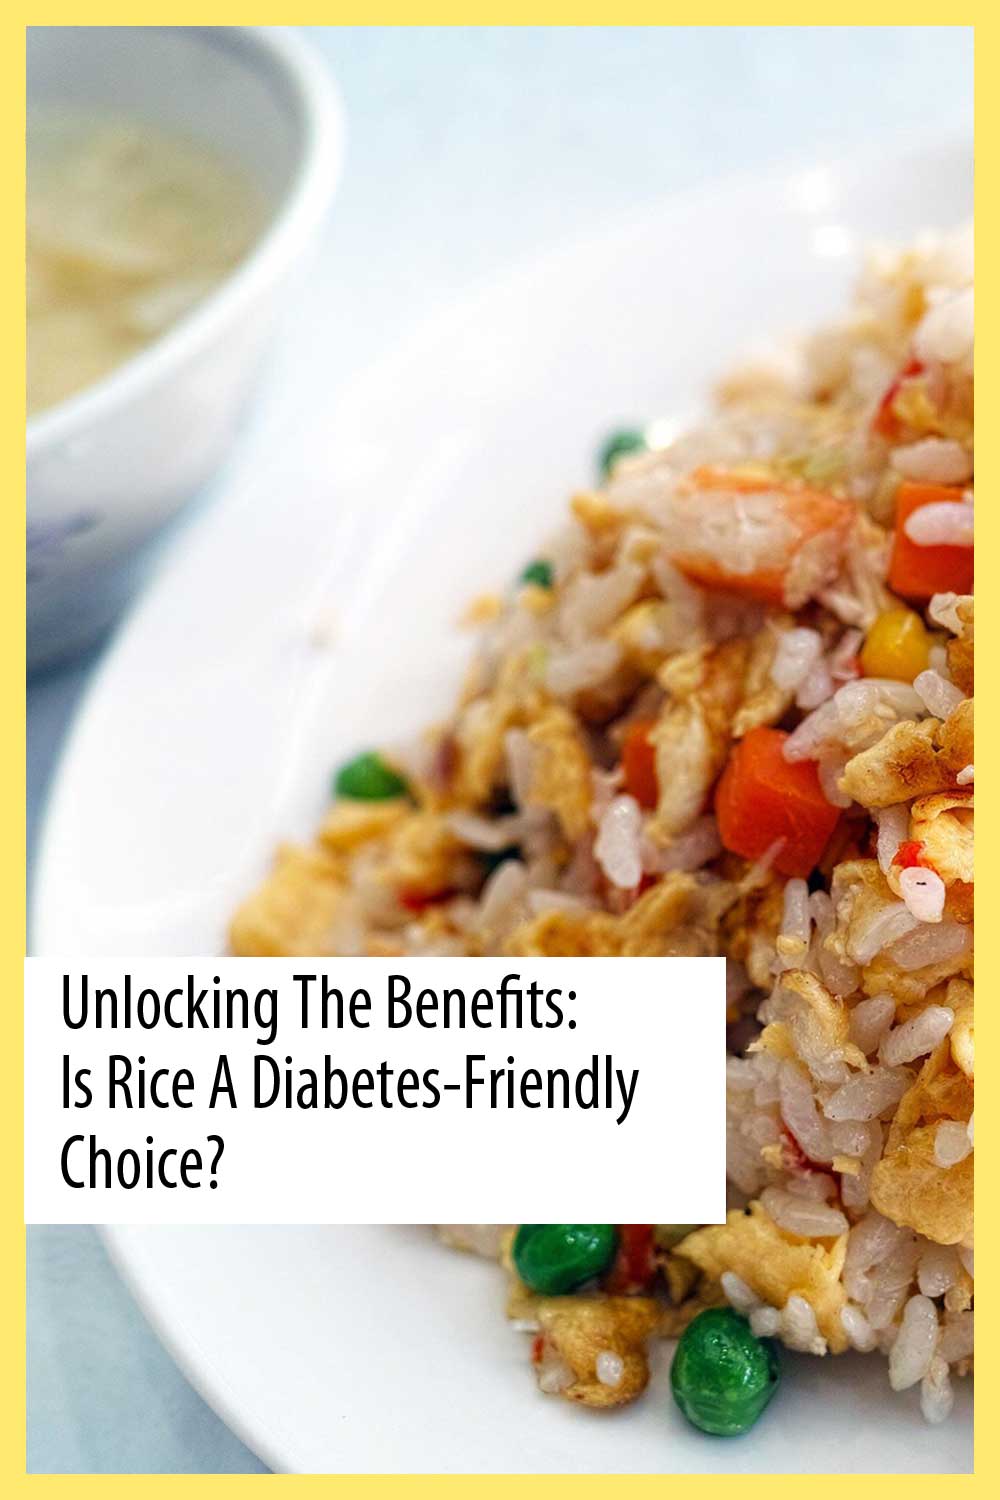 Unlocking the Benefits: Is Rice a Diabetes-Friendly Choice?